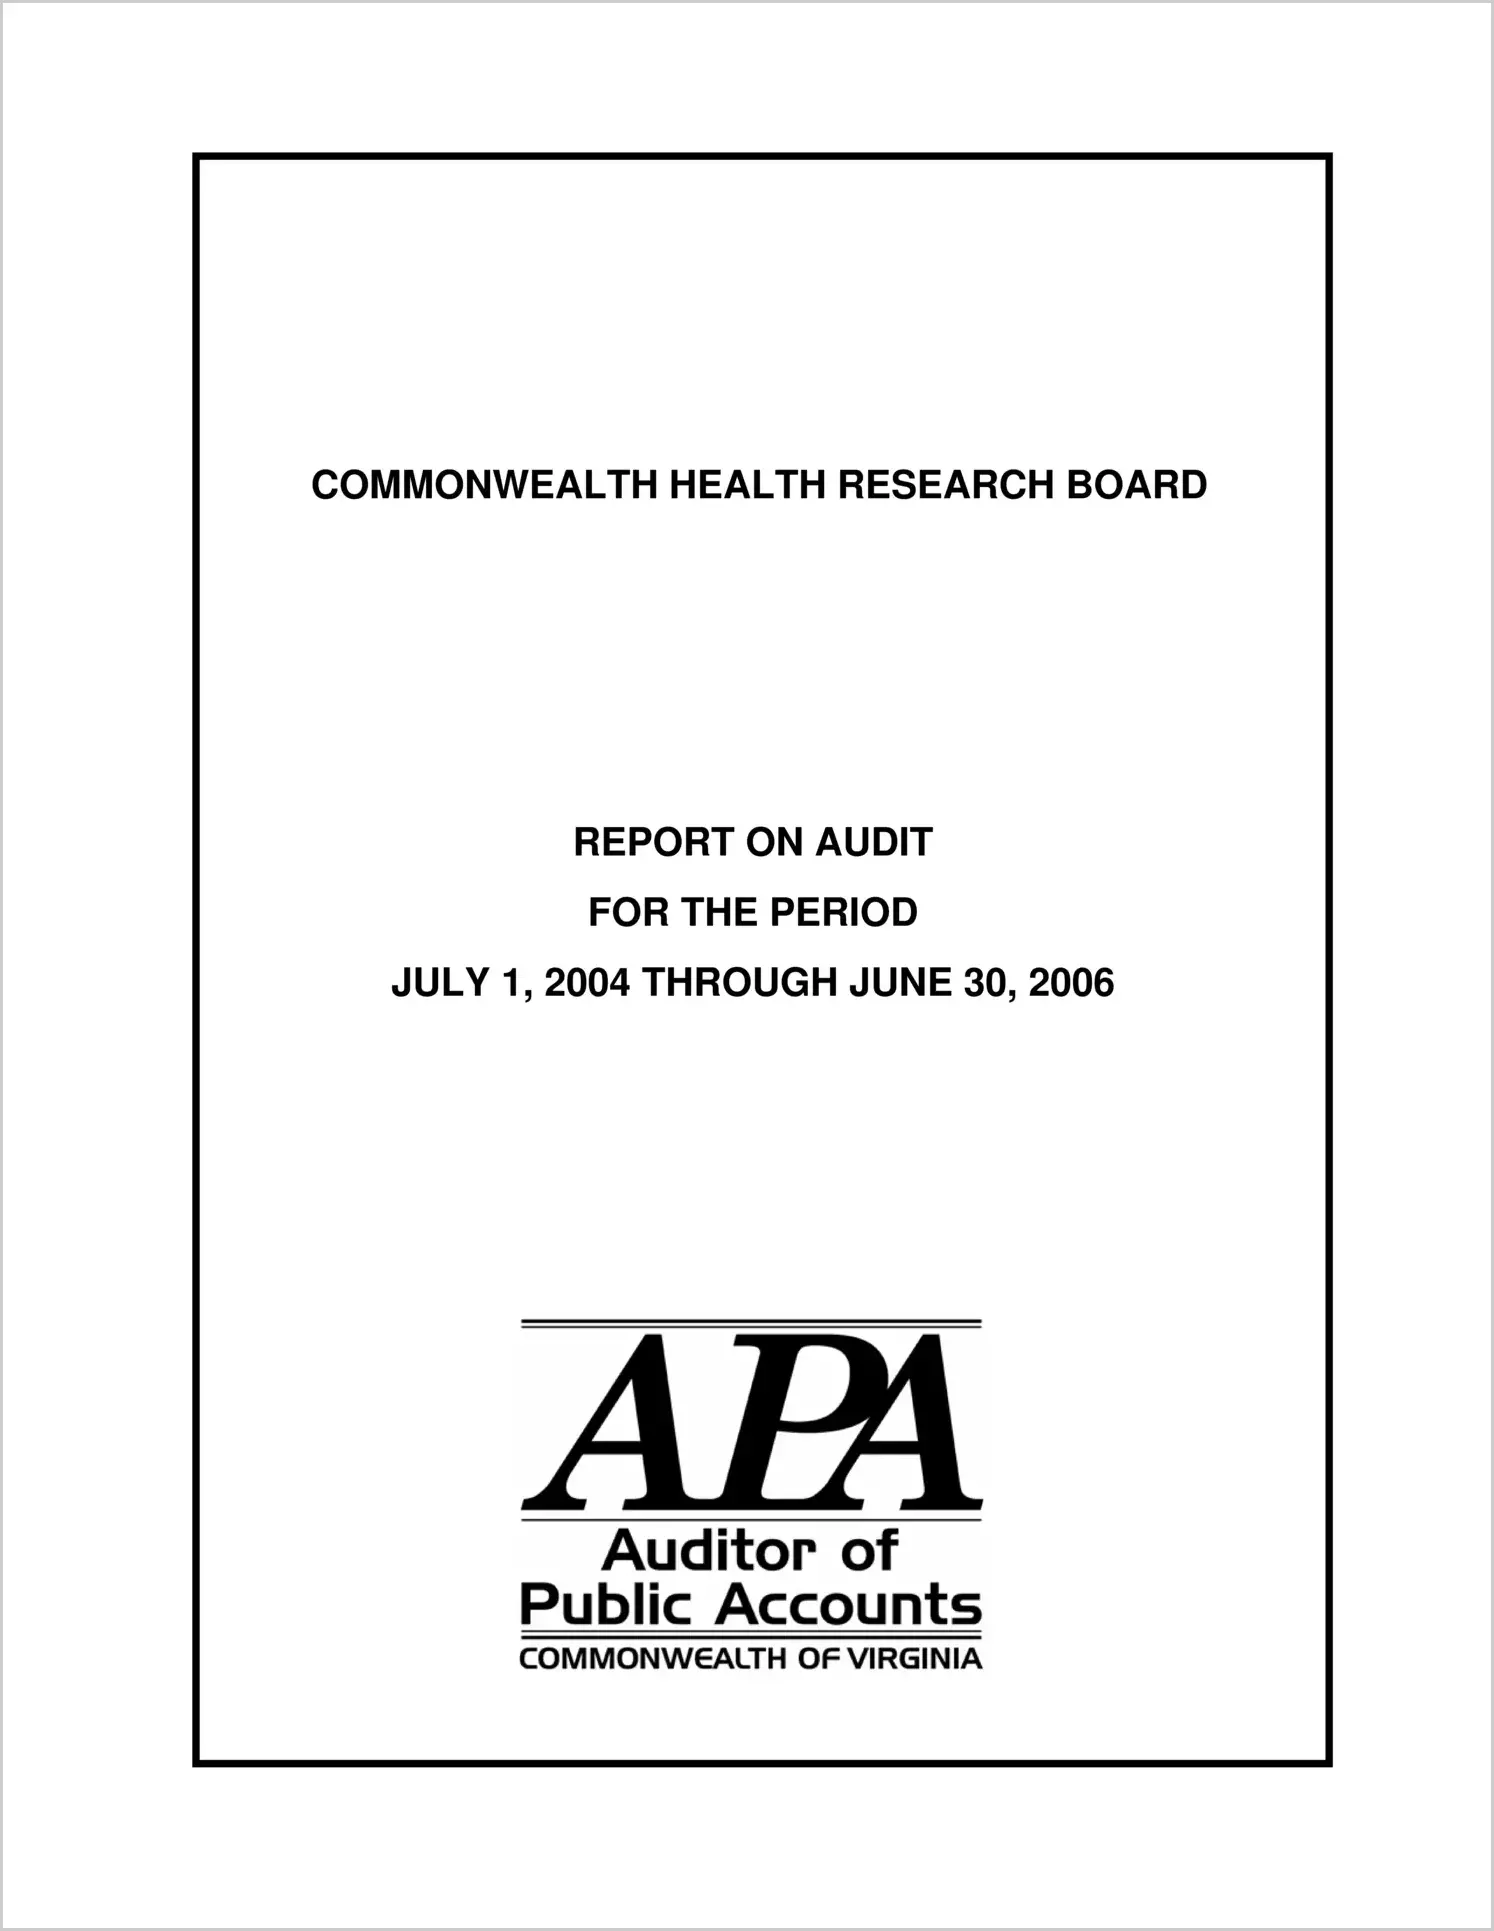 Commonwealth Health Research Board for the period July 1, 2004 through June 30, 2006